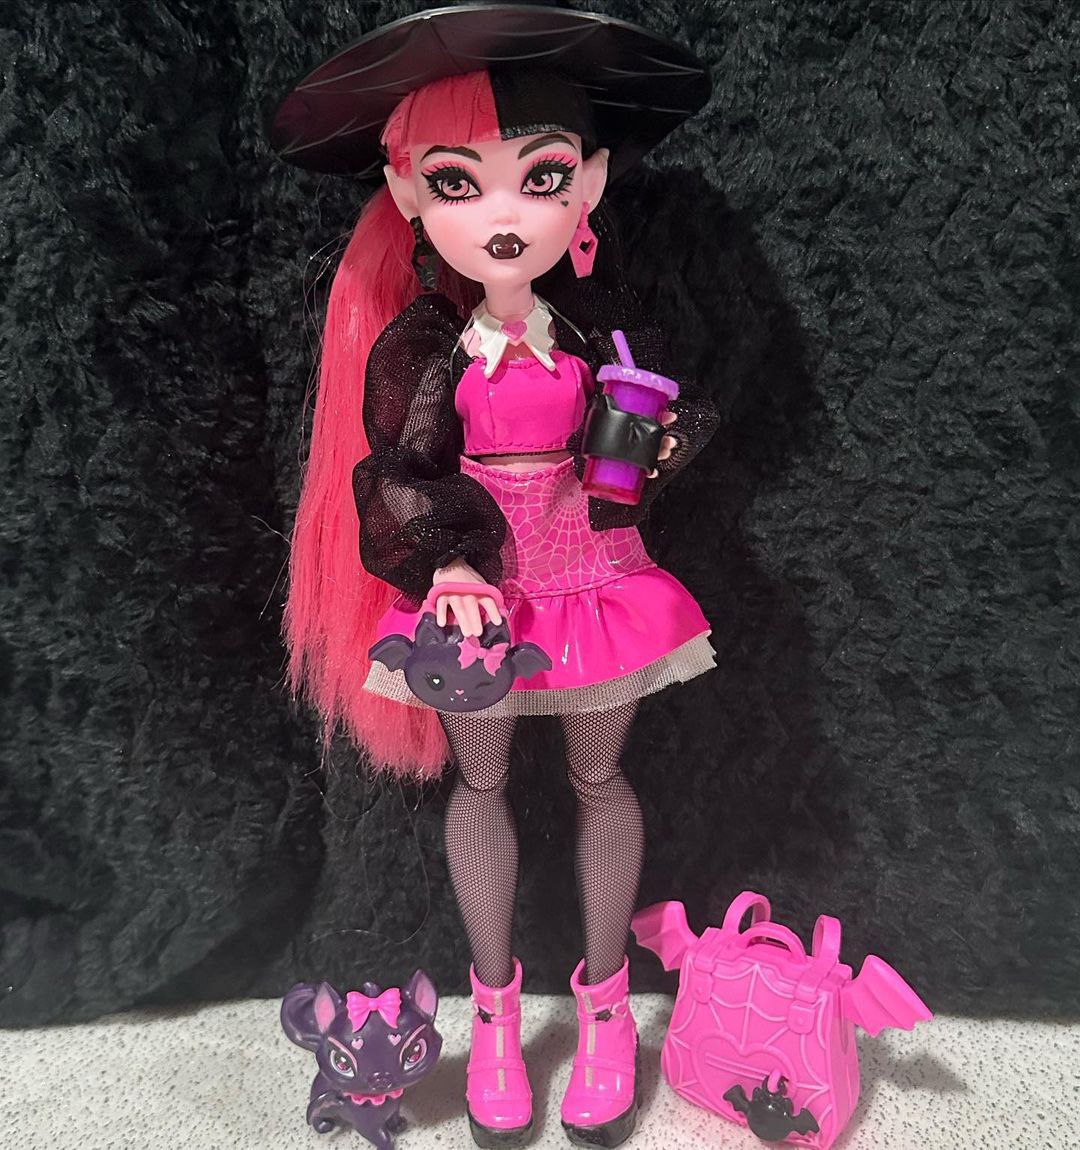 G3 Draculaura 🦇 I am obsessed… that's it that's all. How do you feel ab G3  Draculaura 👀 @monsterhigh #monsterhigh #mymattelcreations…